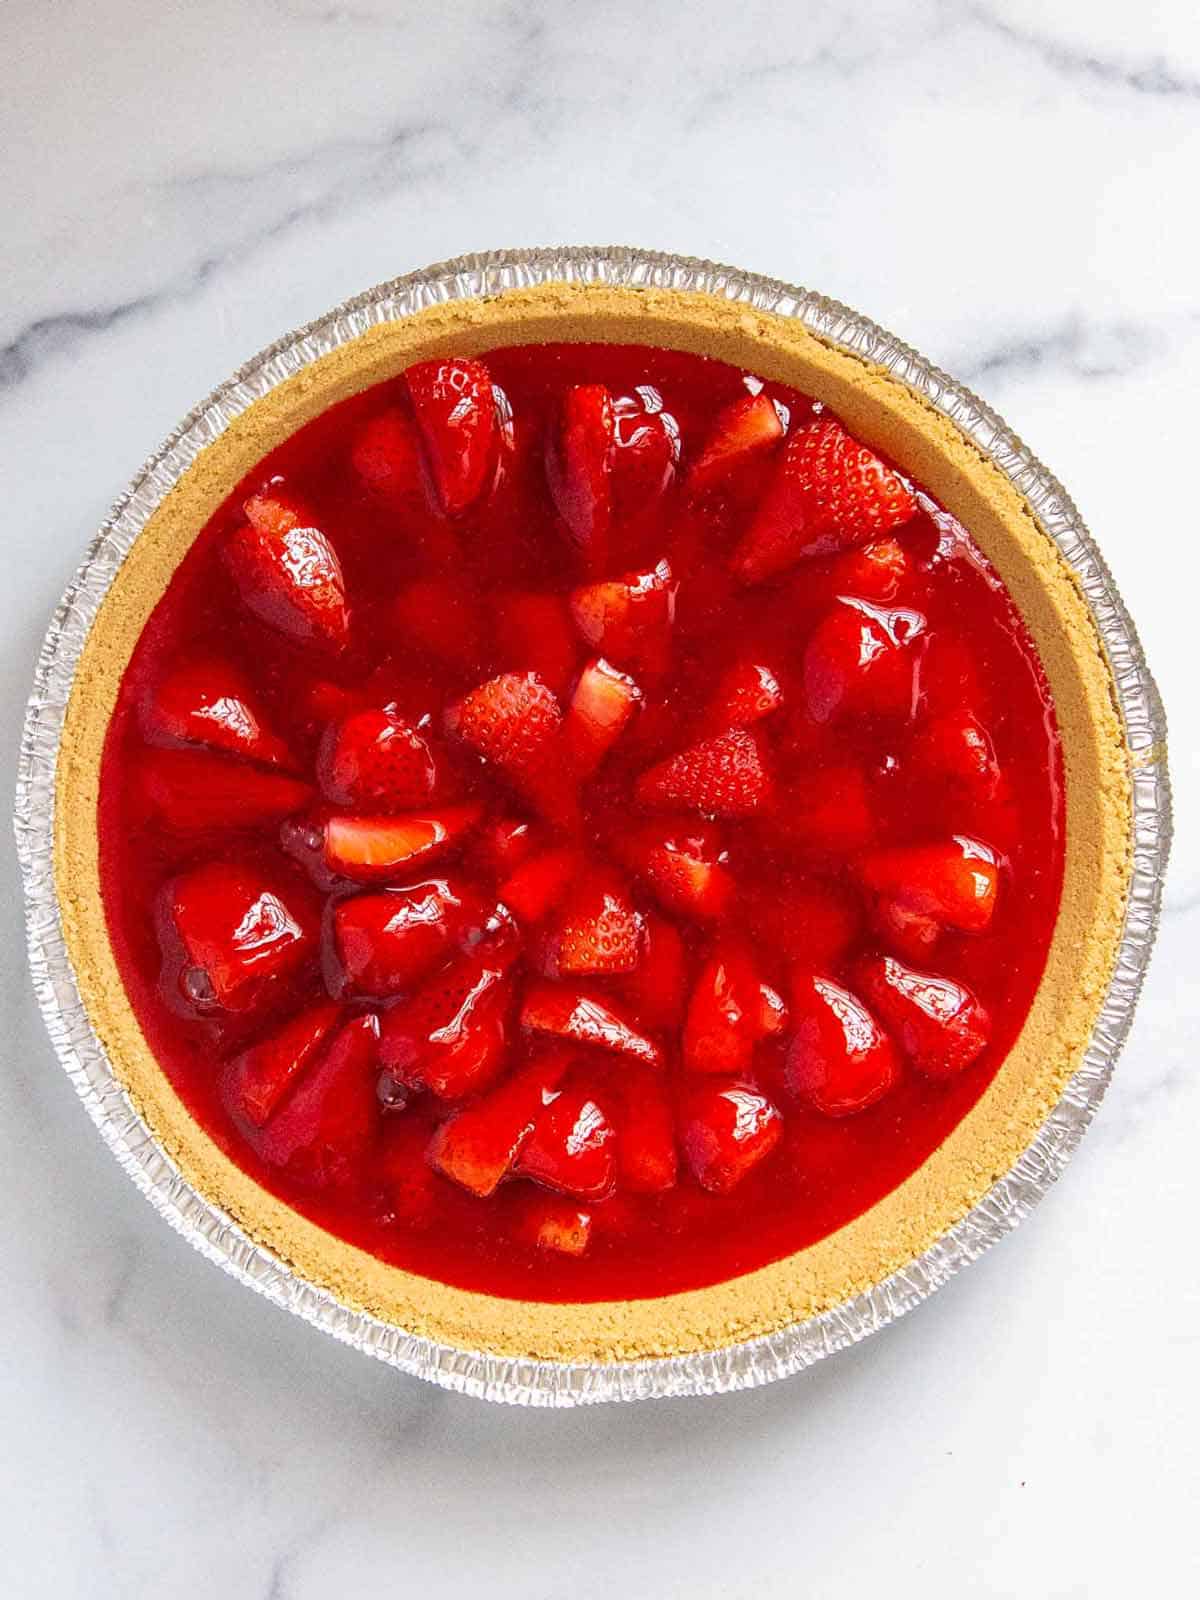 Strawberries cut side facing down in a graham cracker pie crust with jello poured evenly over top.